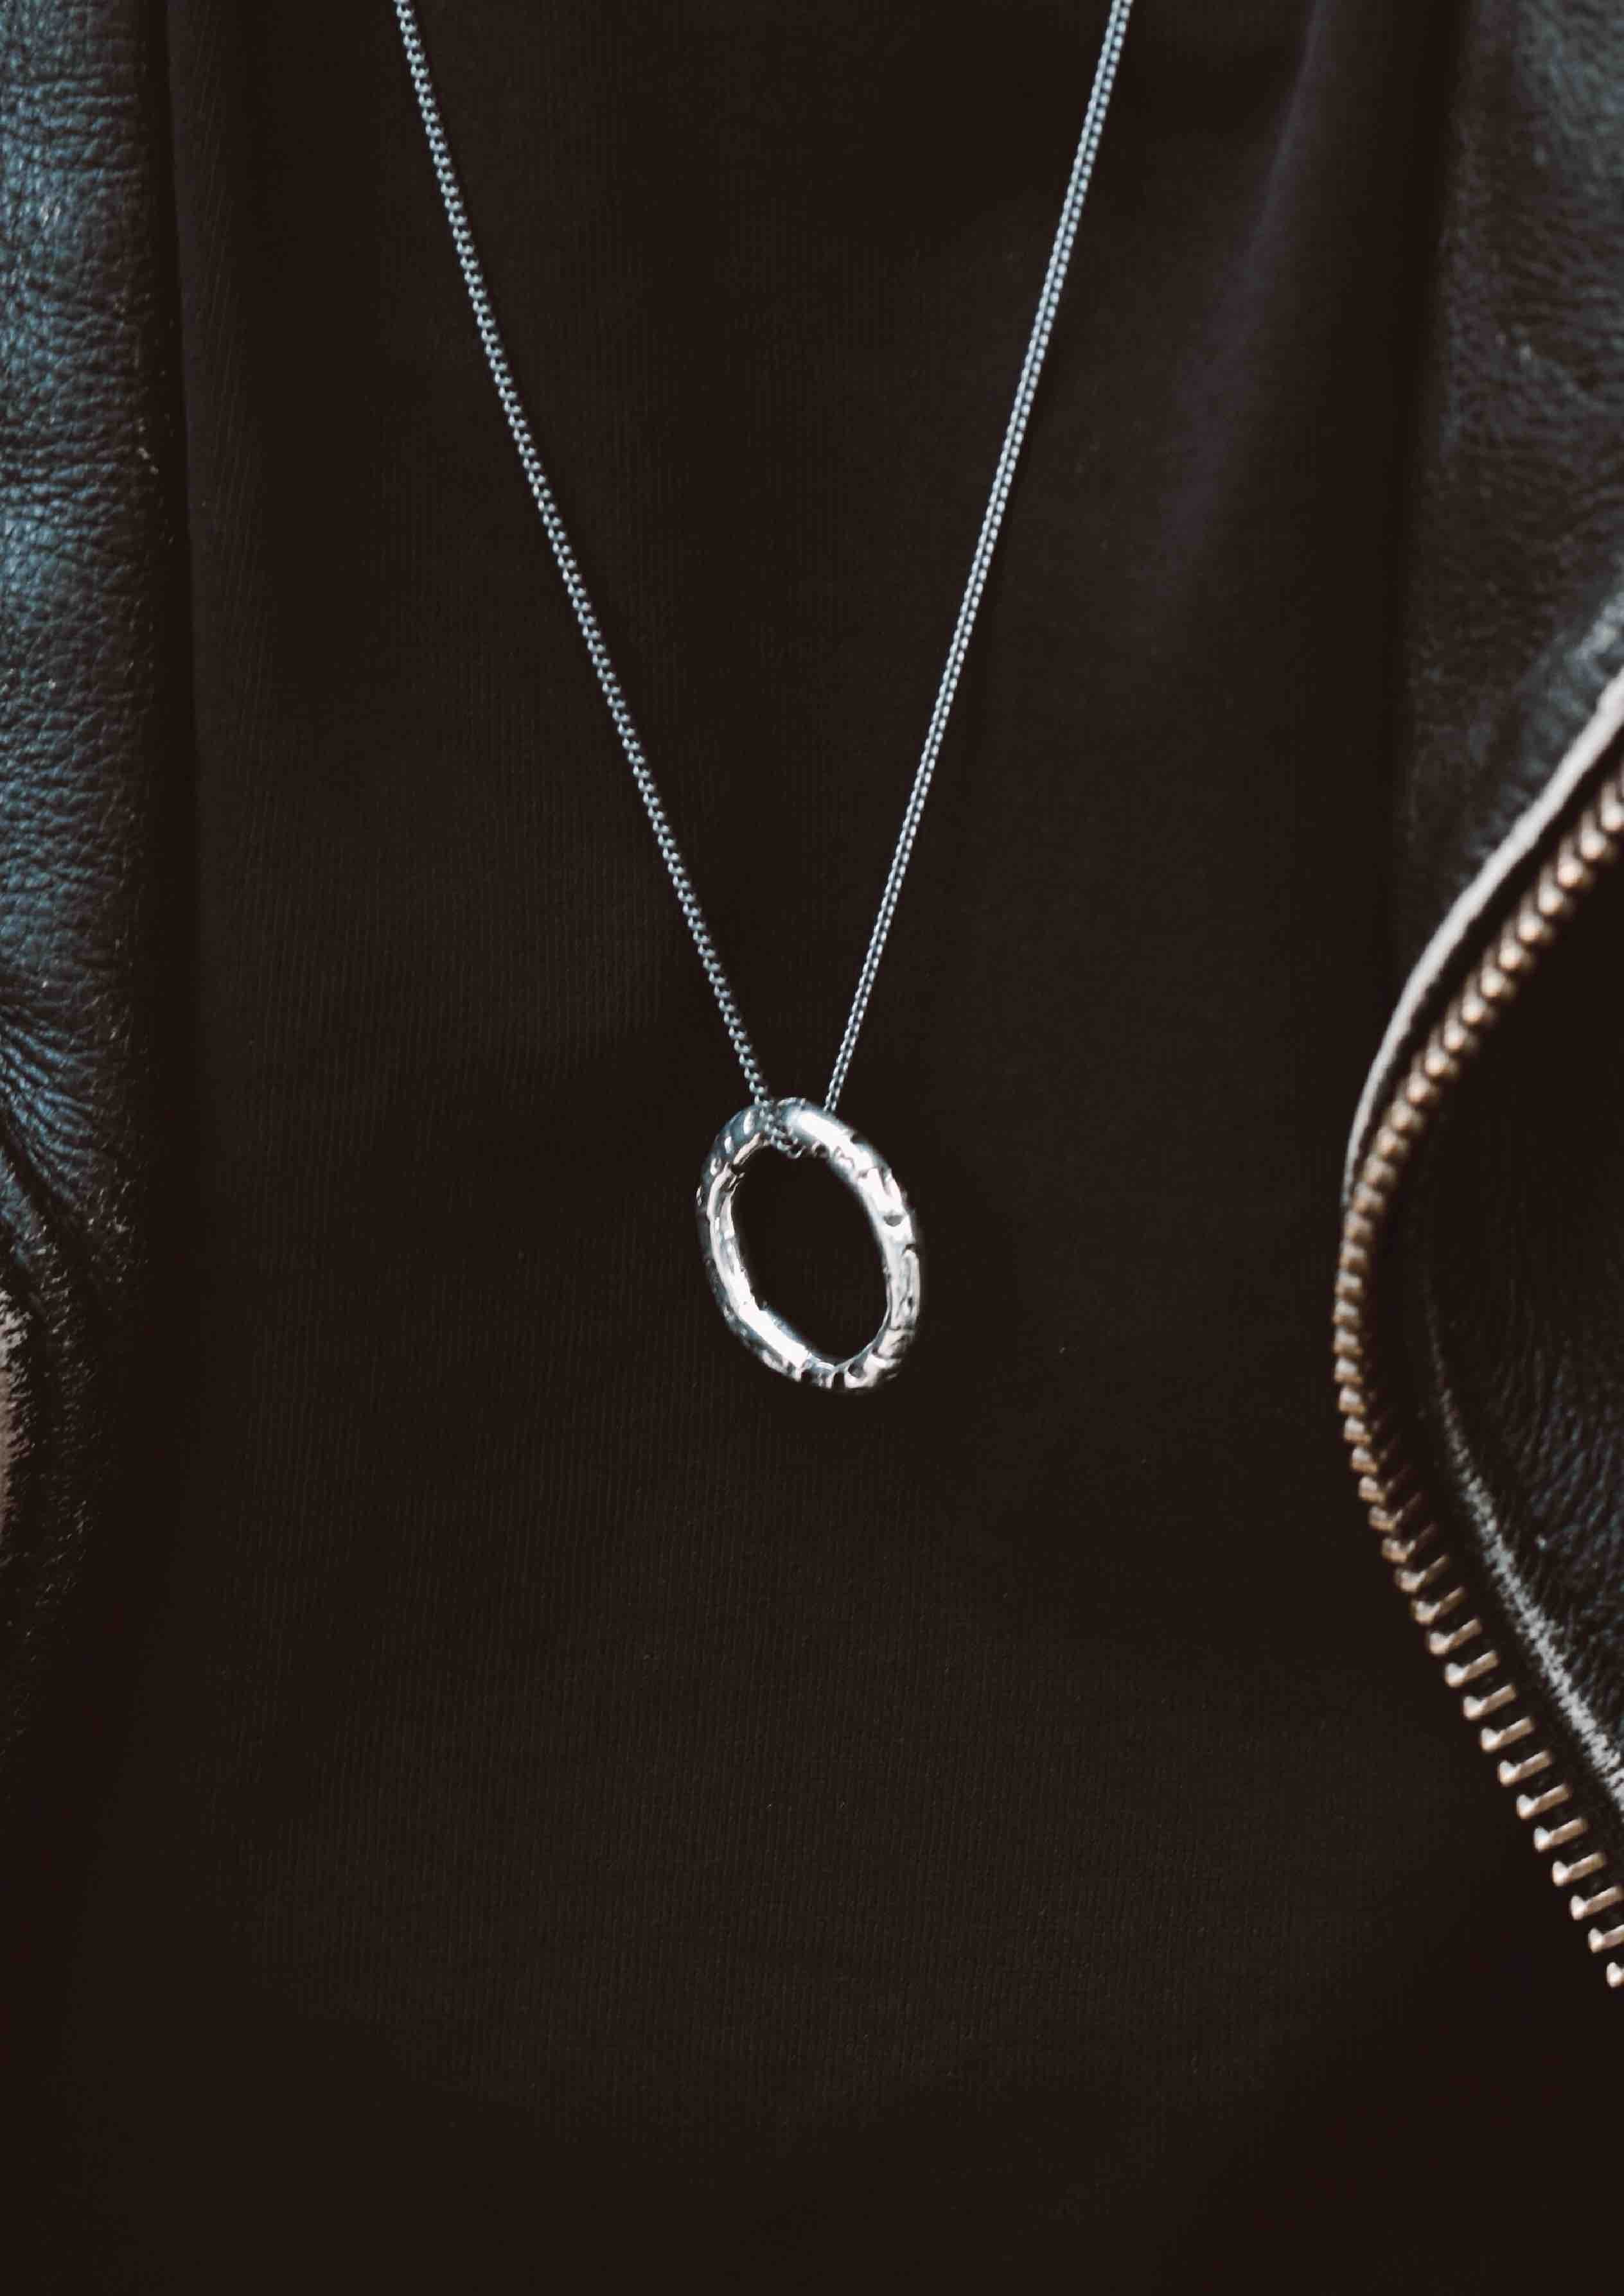 NO MORE accessories Men's Black Hole necklace in oxidised sterling silver